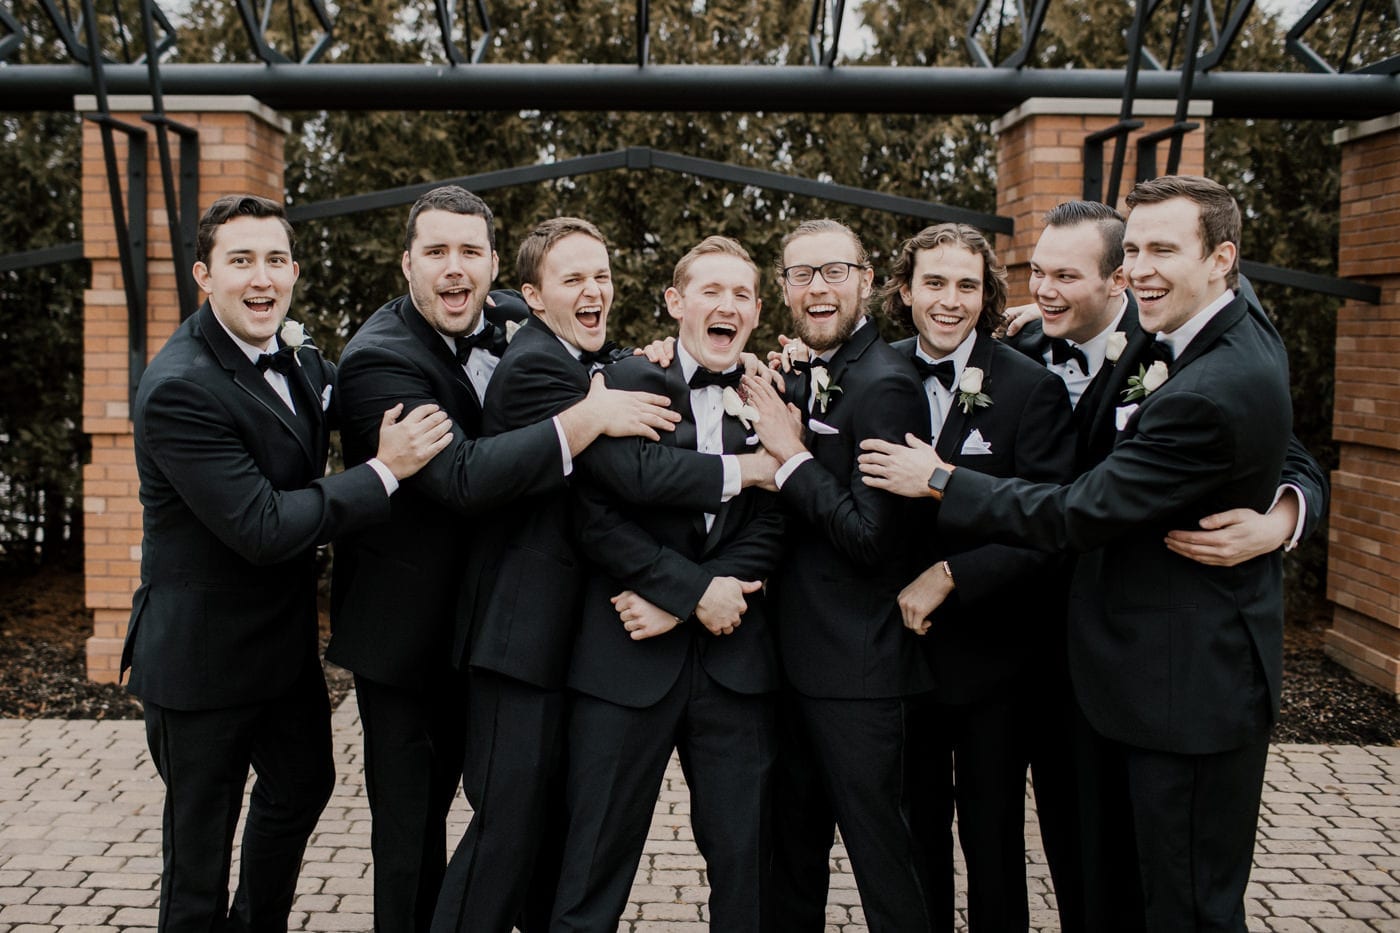 goofy picture of groom and groomsmen laughing at black tie winter wedding